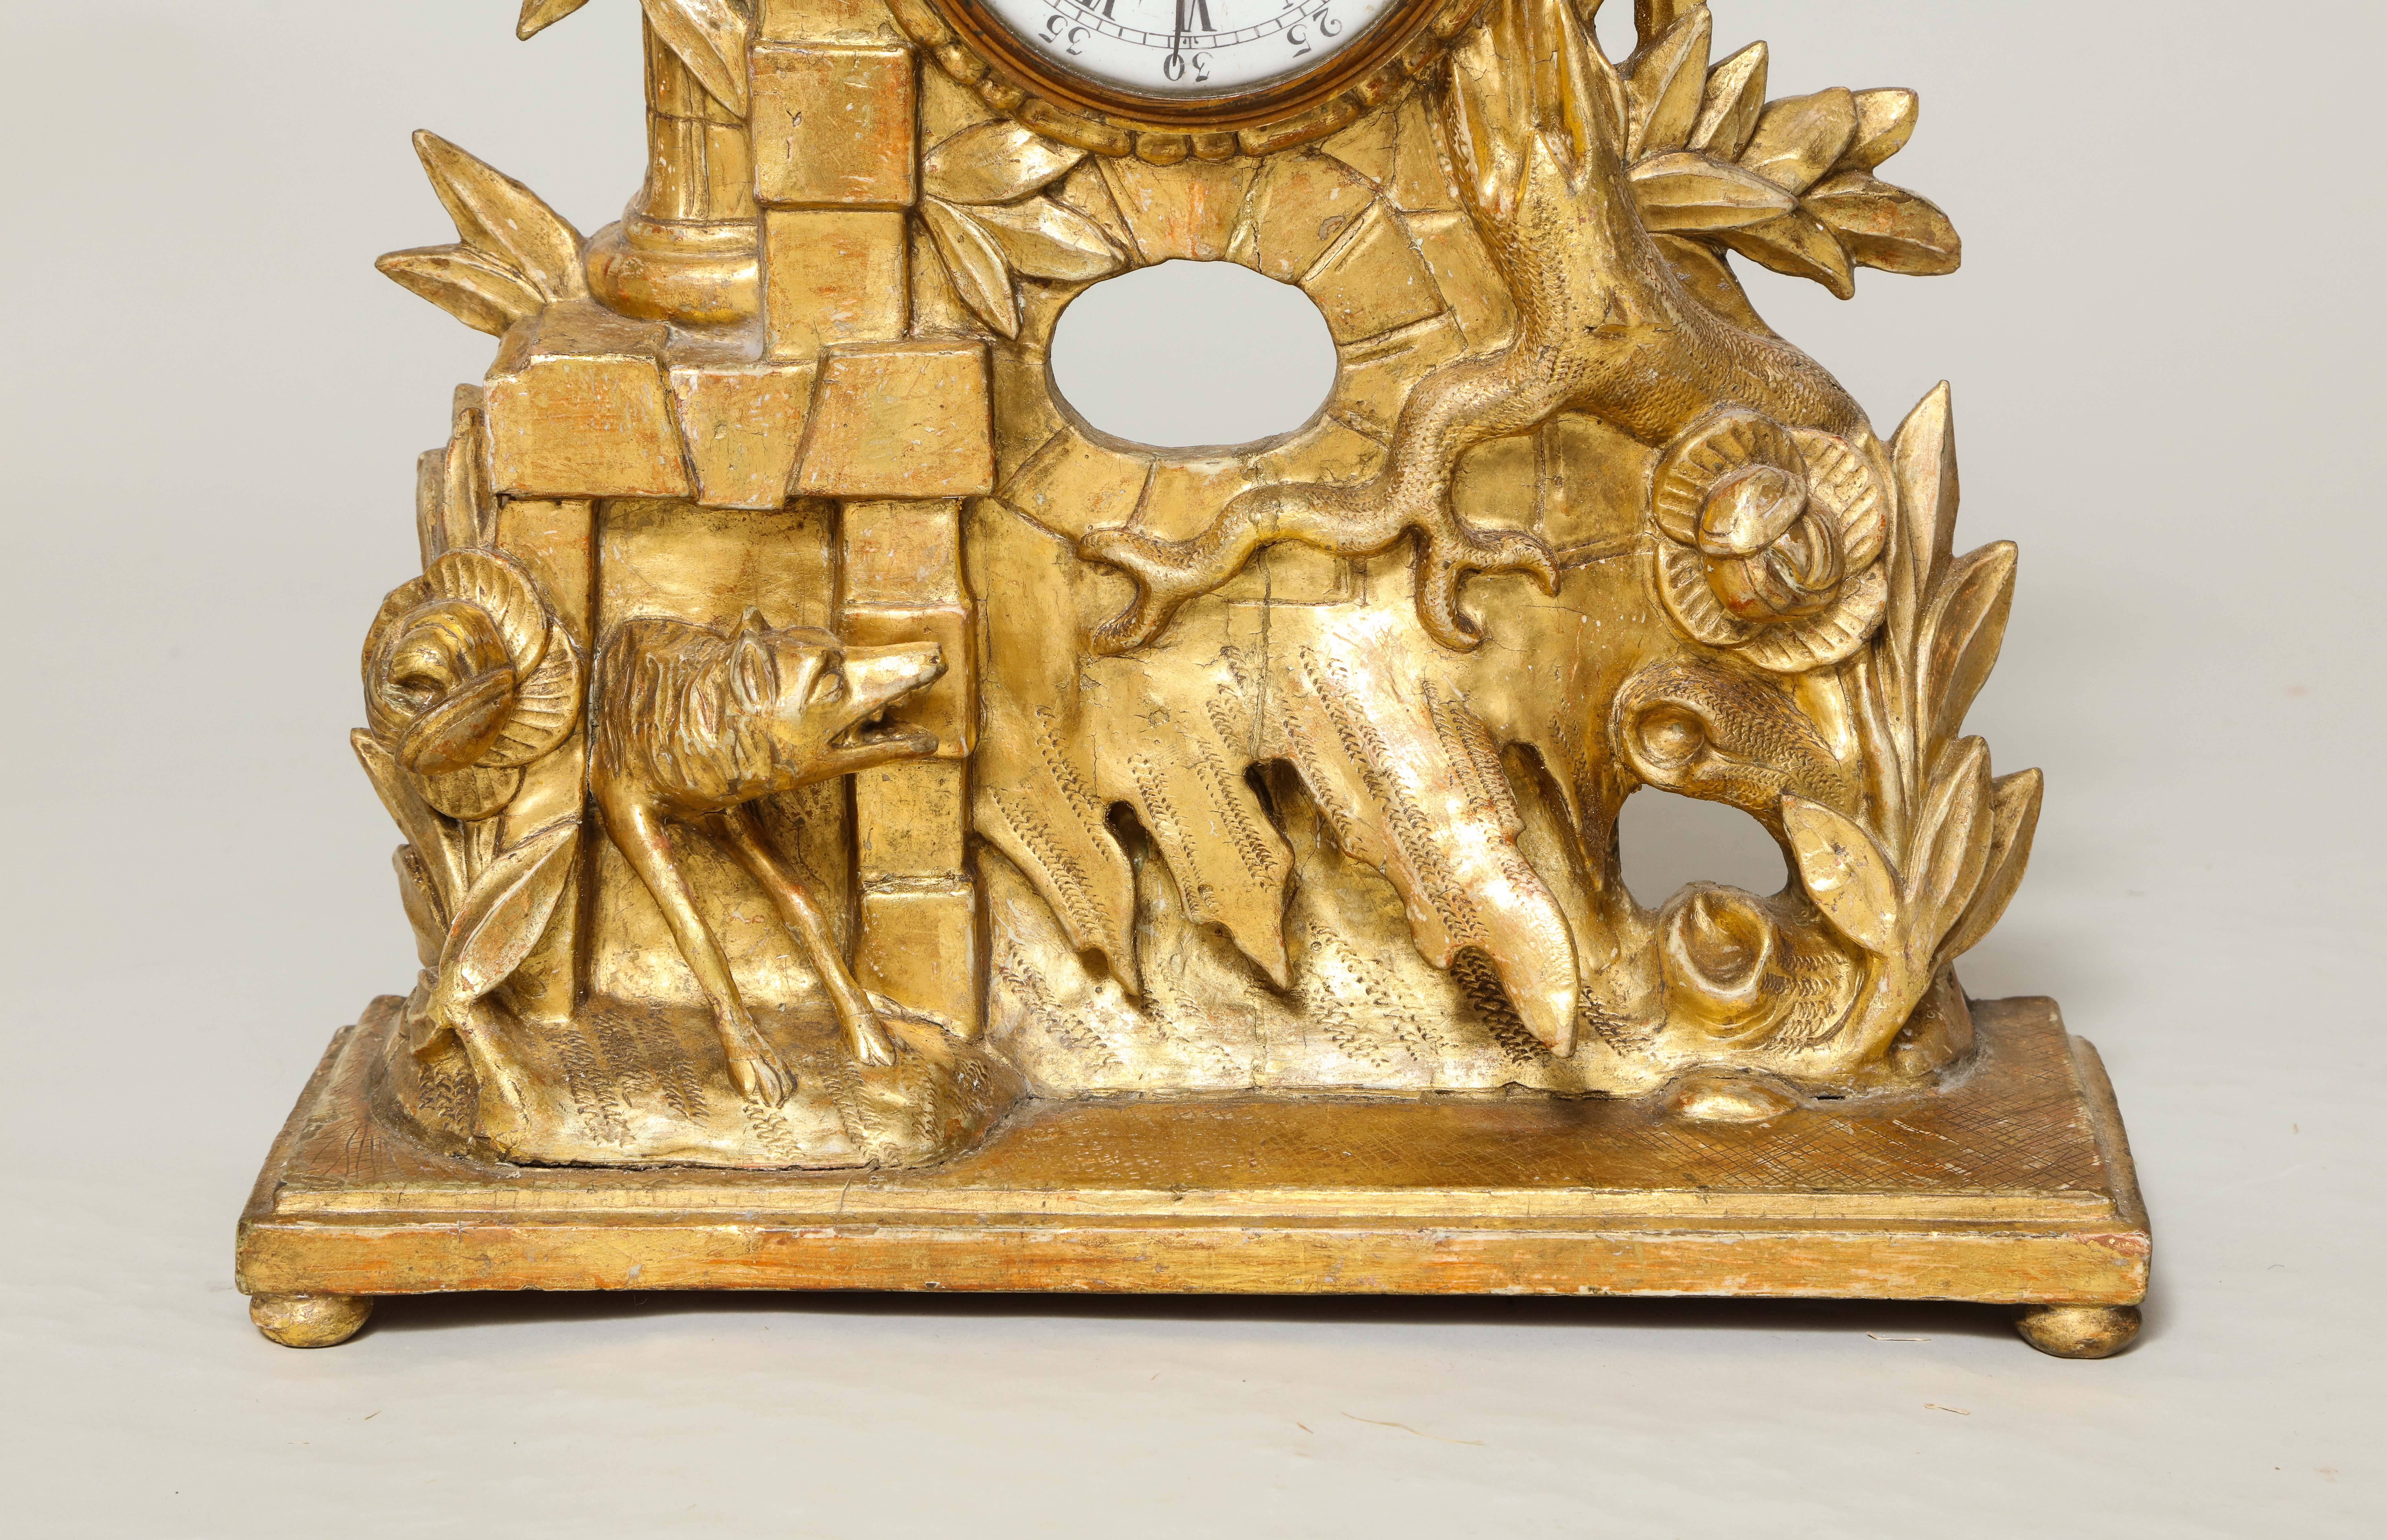 Fine 18th century rococo carved and giltwood shelf clock, the crest with stork holding a bone in his beak pearched on a romantic castle ruin with carved foliate decoration, vines and trees, the platform with wolf emerging from a quoin embellished